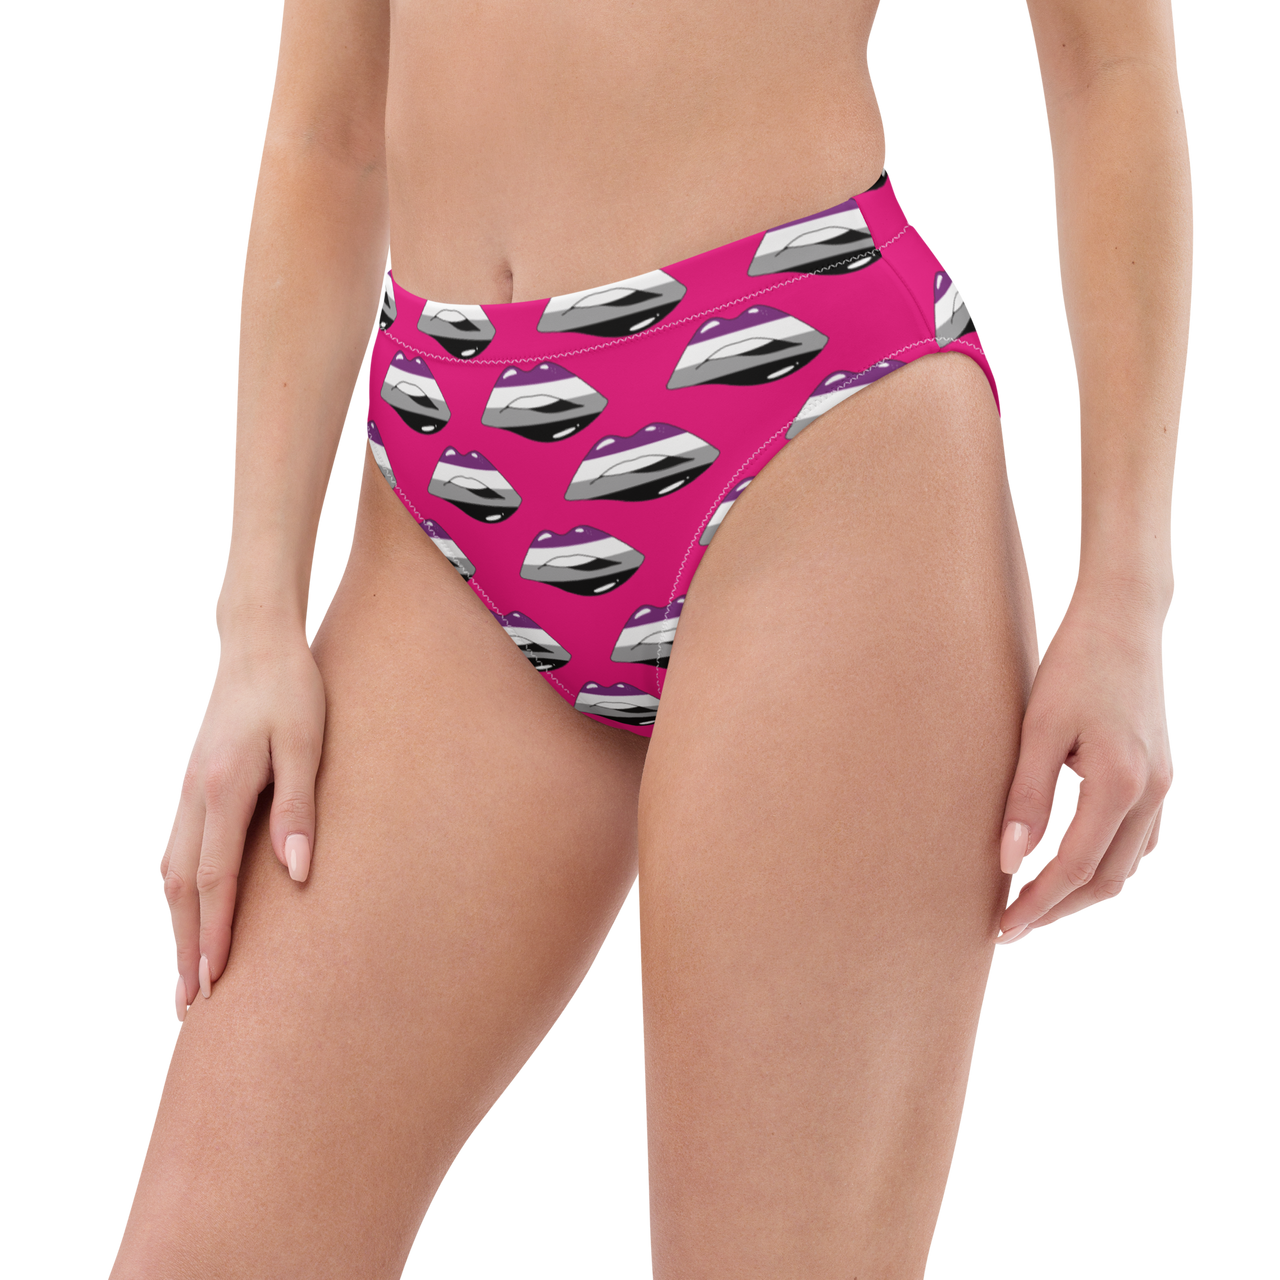 Asexual Flag LGBTQ Kisses Underwear for They/Them Him/Her - Pink SHAVA